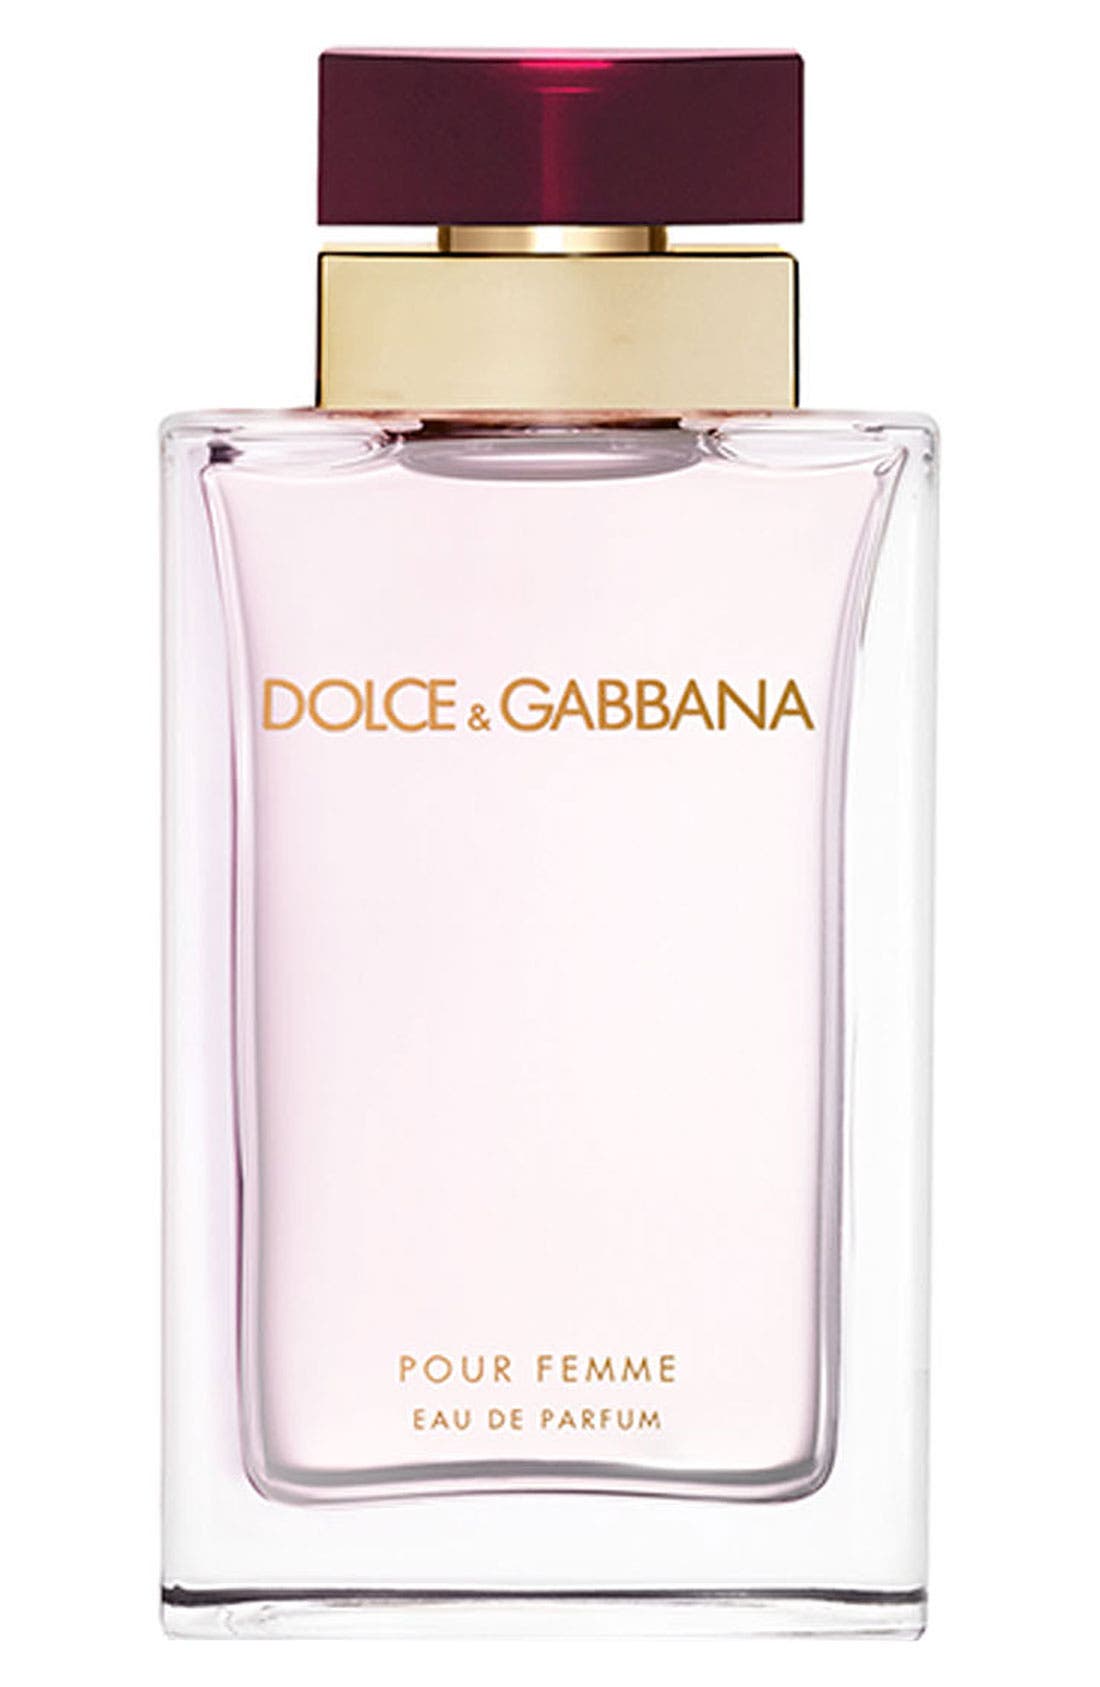 dolce and gabbana perfume boots